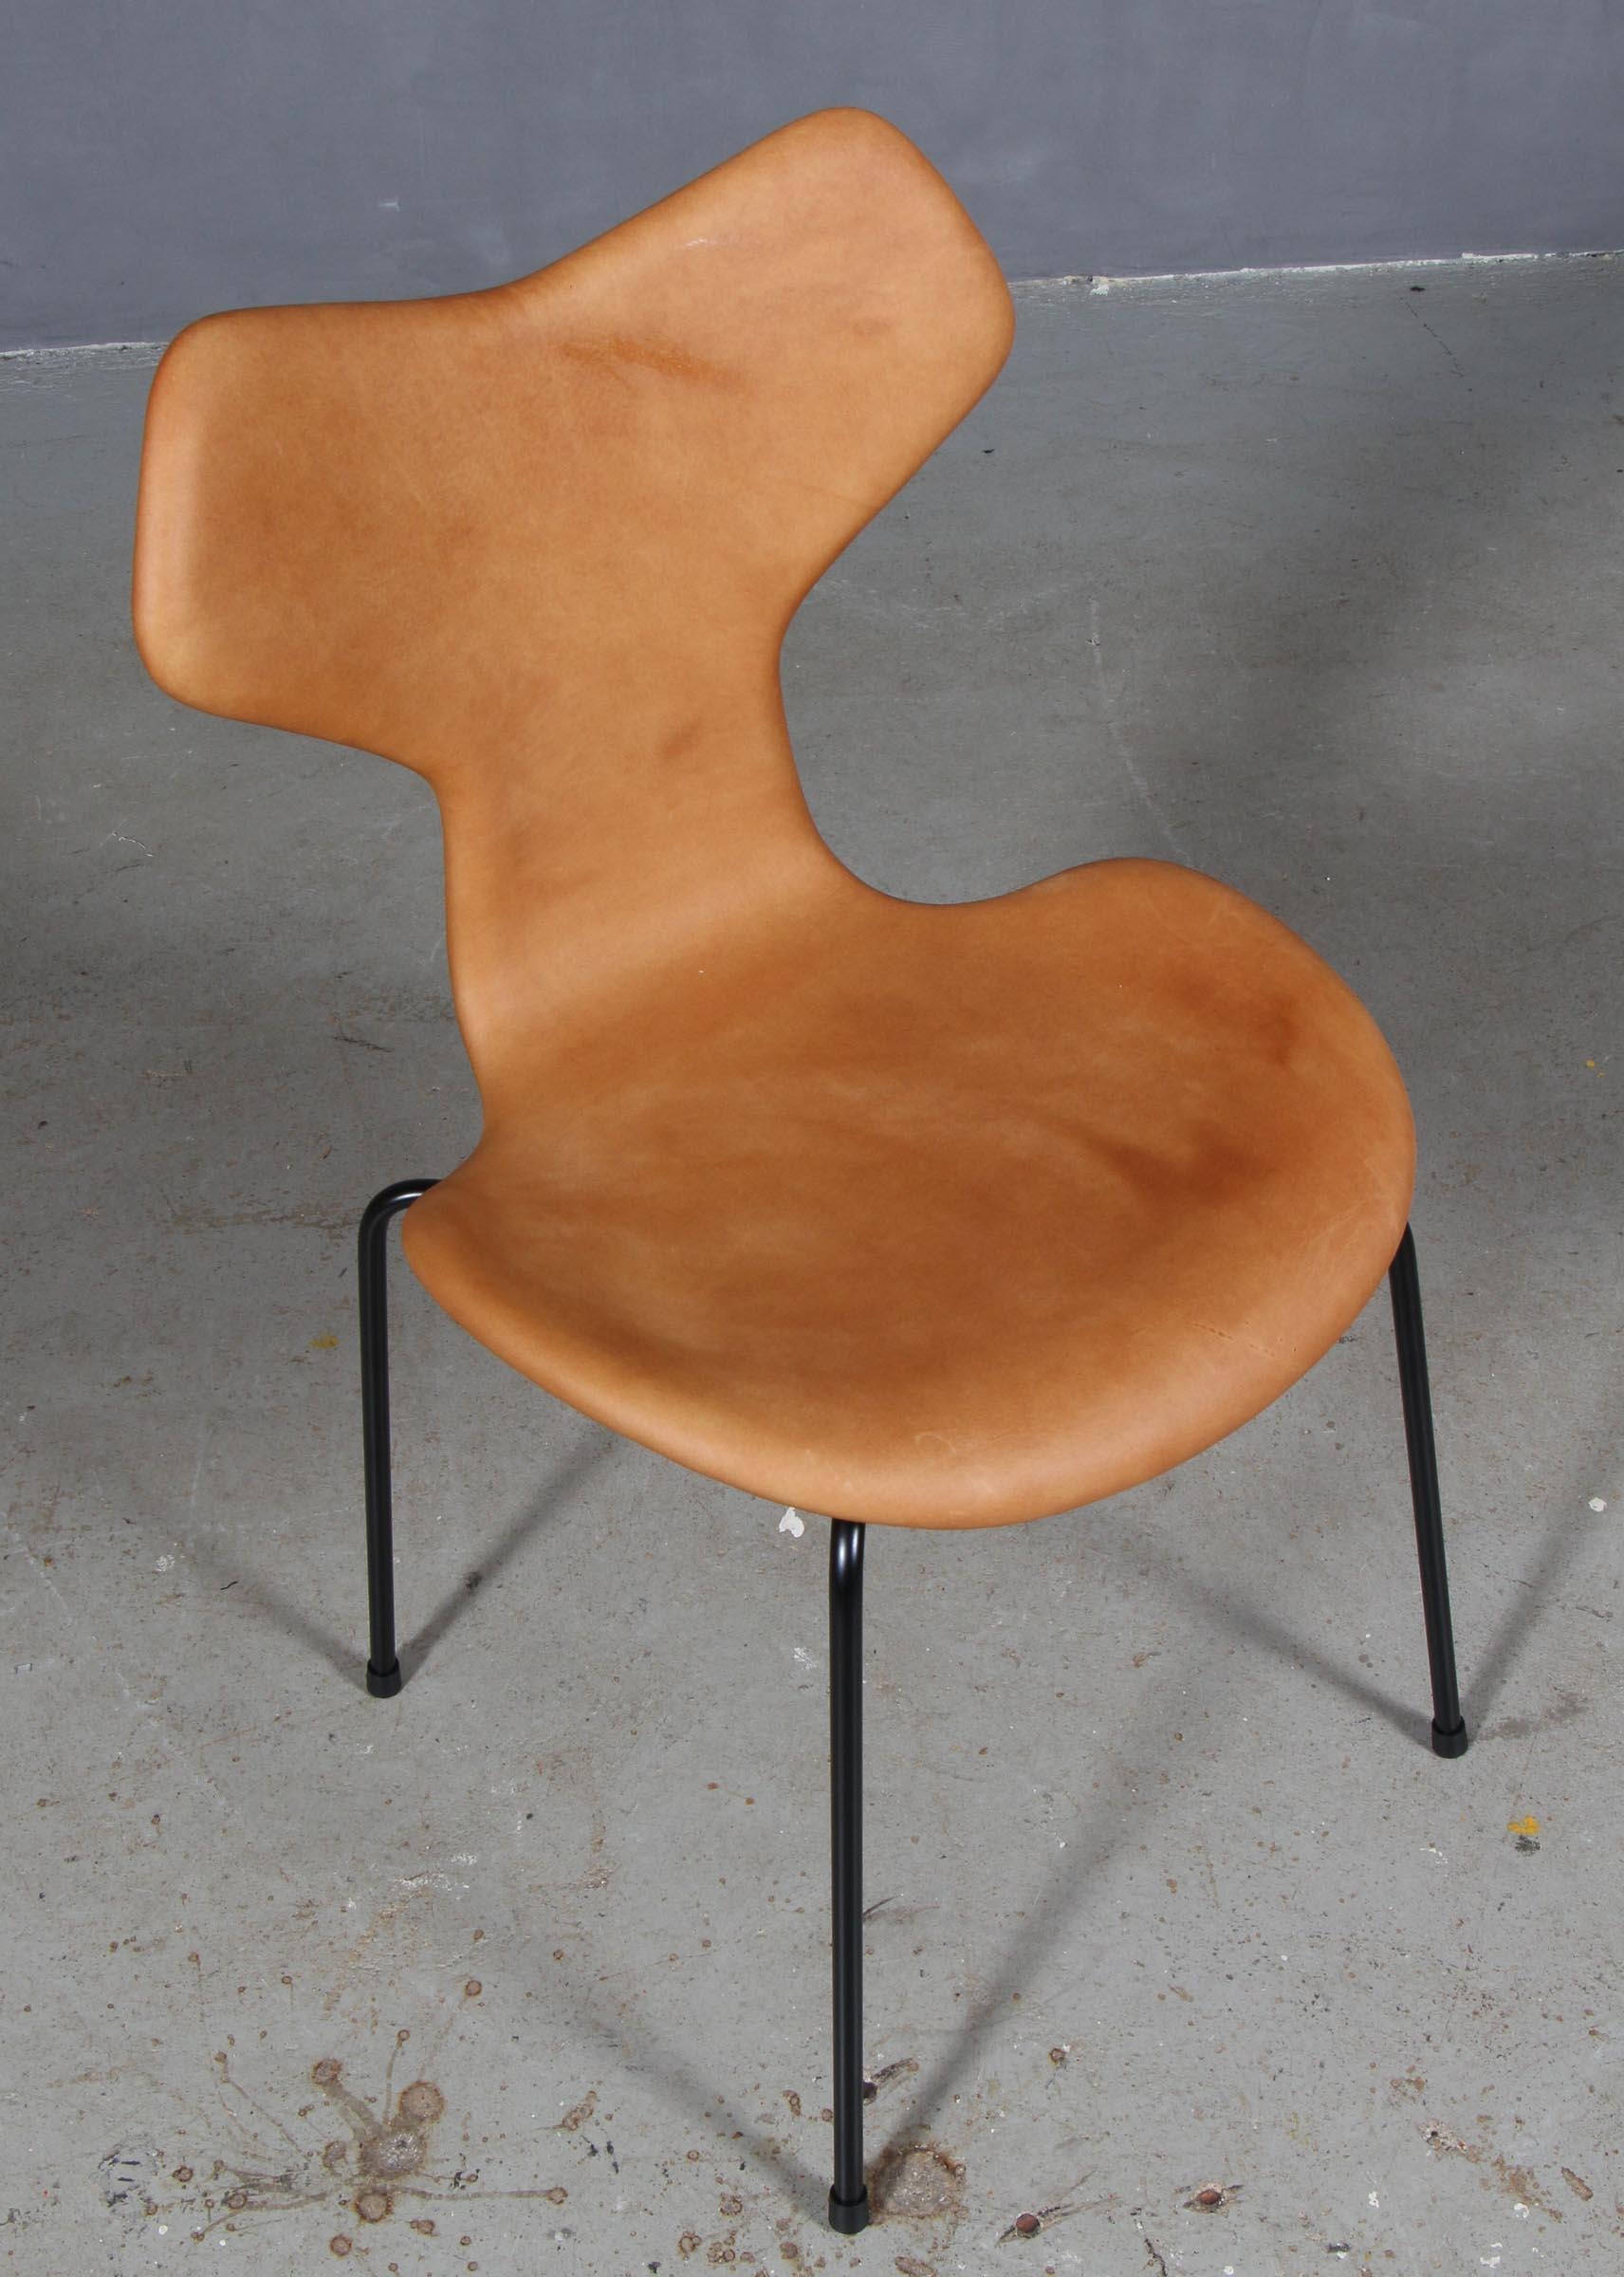 Arne Jacobsen dining chair new upholstered with cognac vintage aniline leather.

Base of powder coated steel.

Model 3130 Grand Prix, made by Fritz Hansen.